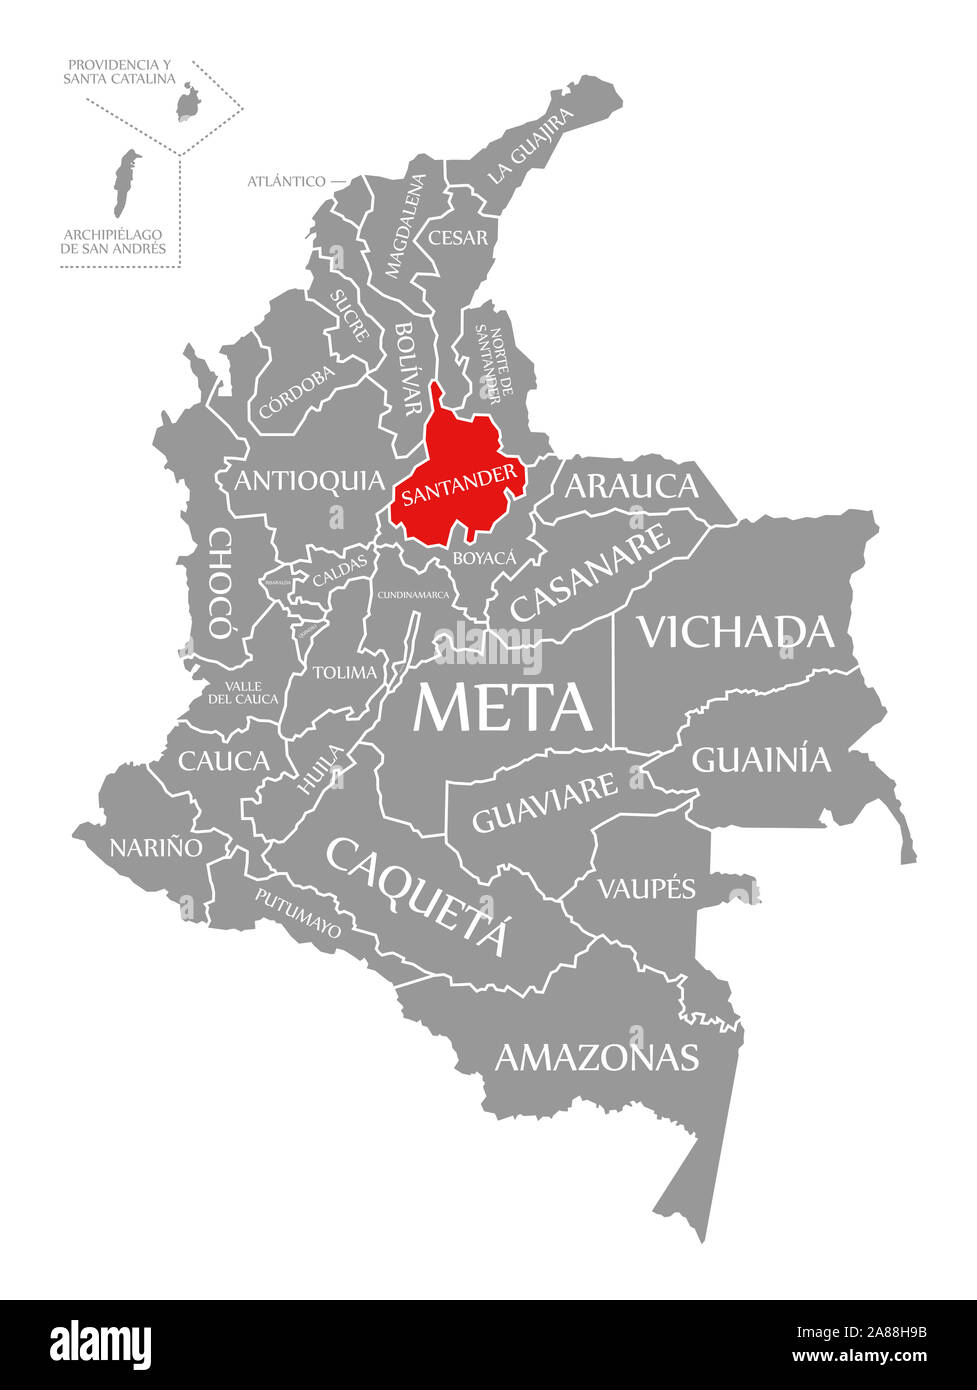 Santander red highlighted in map of Colombia Stock Photo